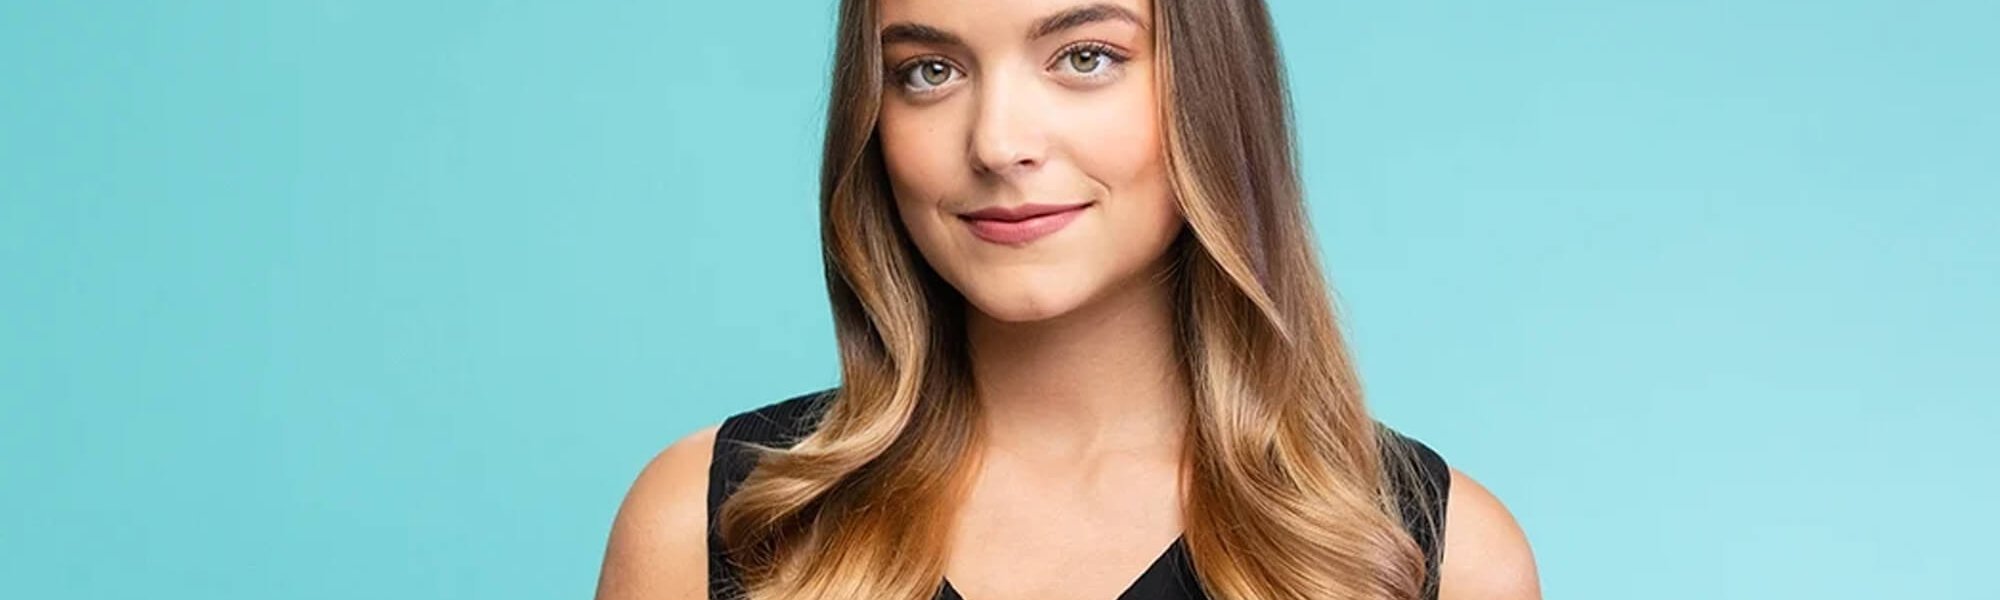 Get the Look: How to Get Brown-to-Blonde Ombré Hair At Home | L'Oréal Paris